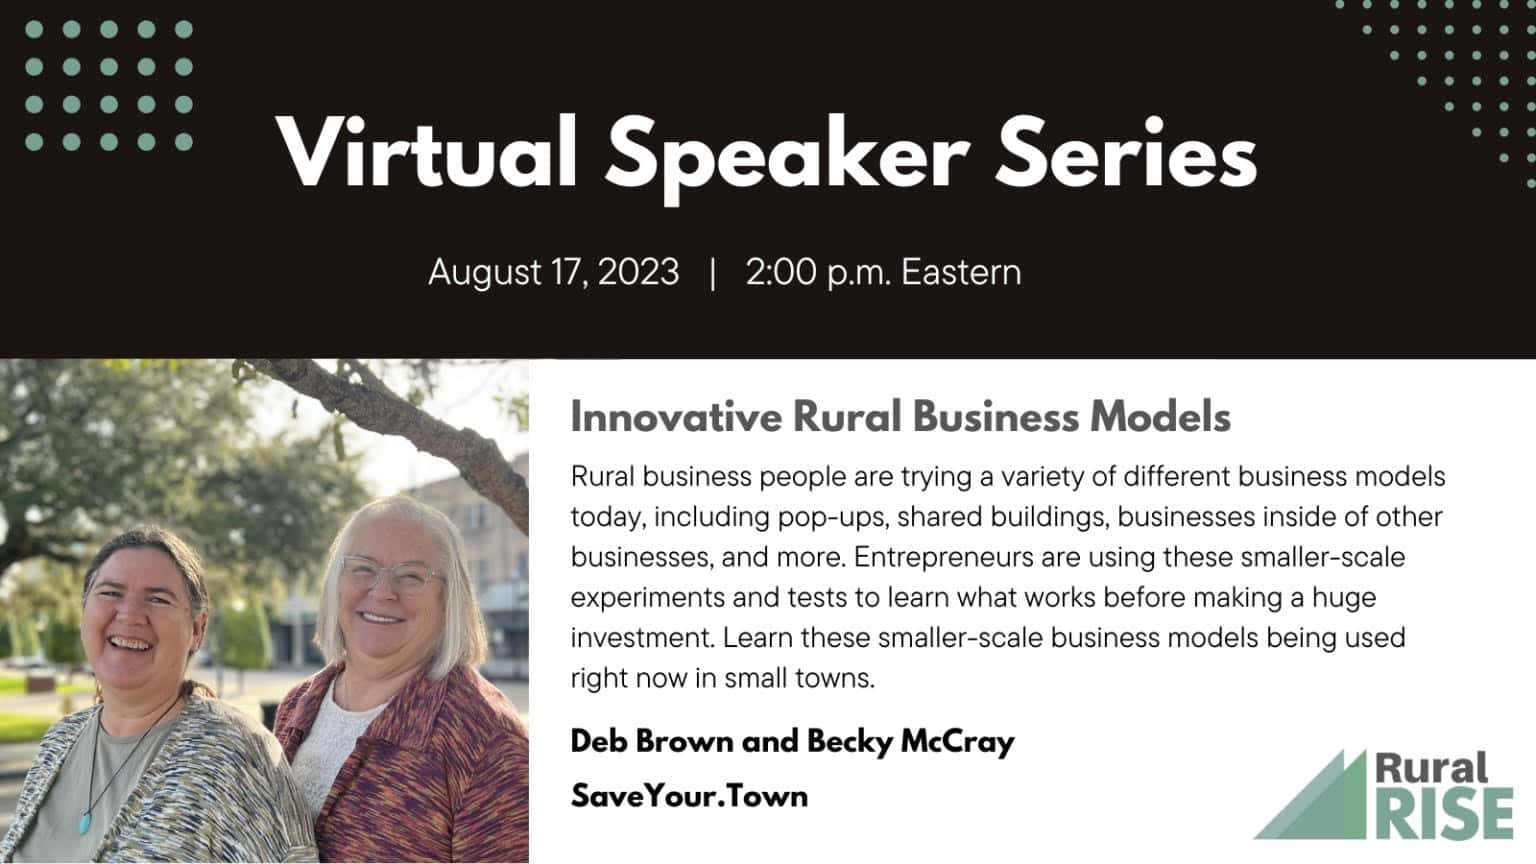 RuralRise Speaker Series, Innovative Rural Business Models with Deb Brown and Becky McCray